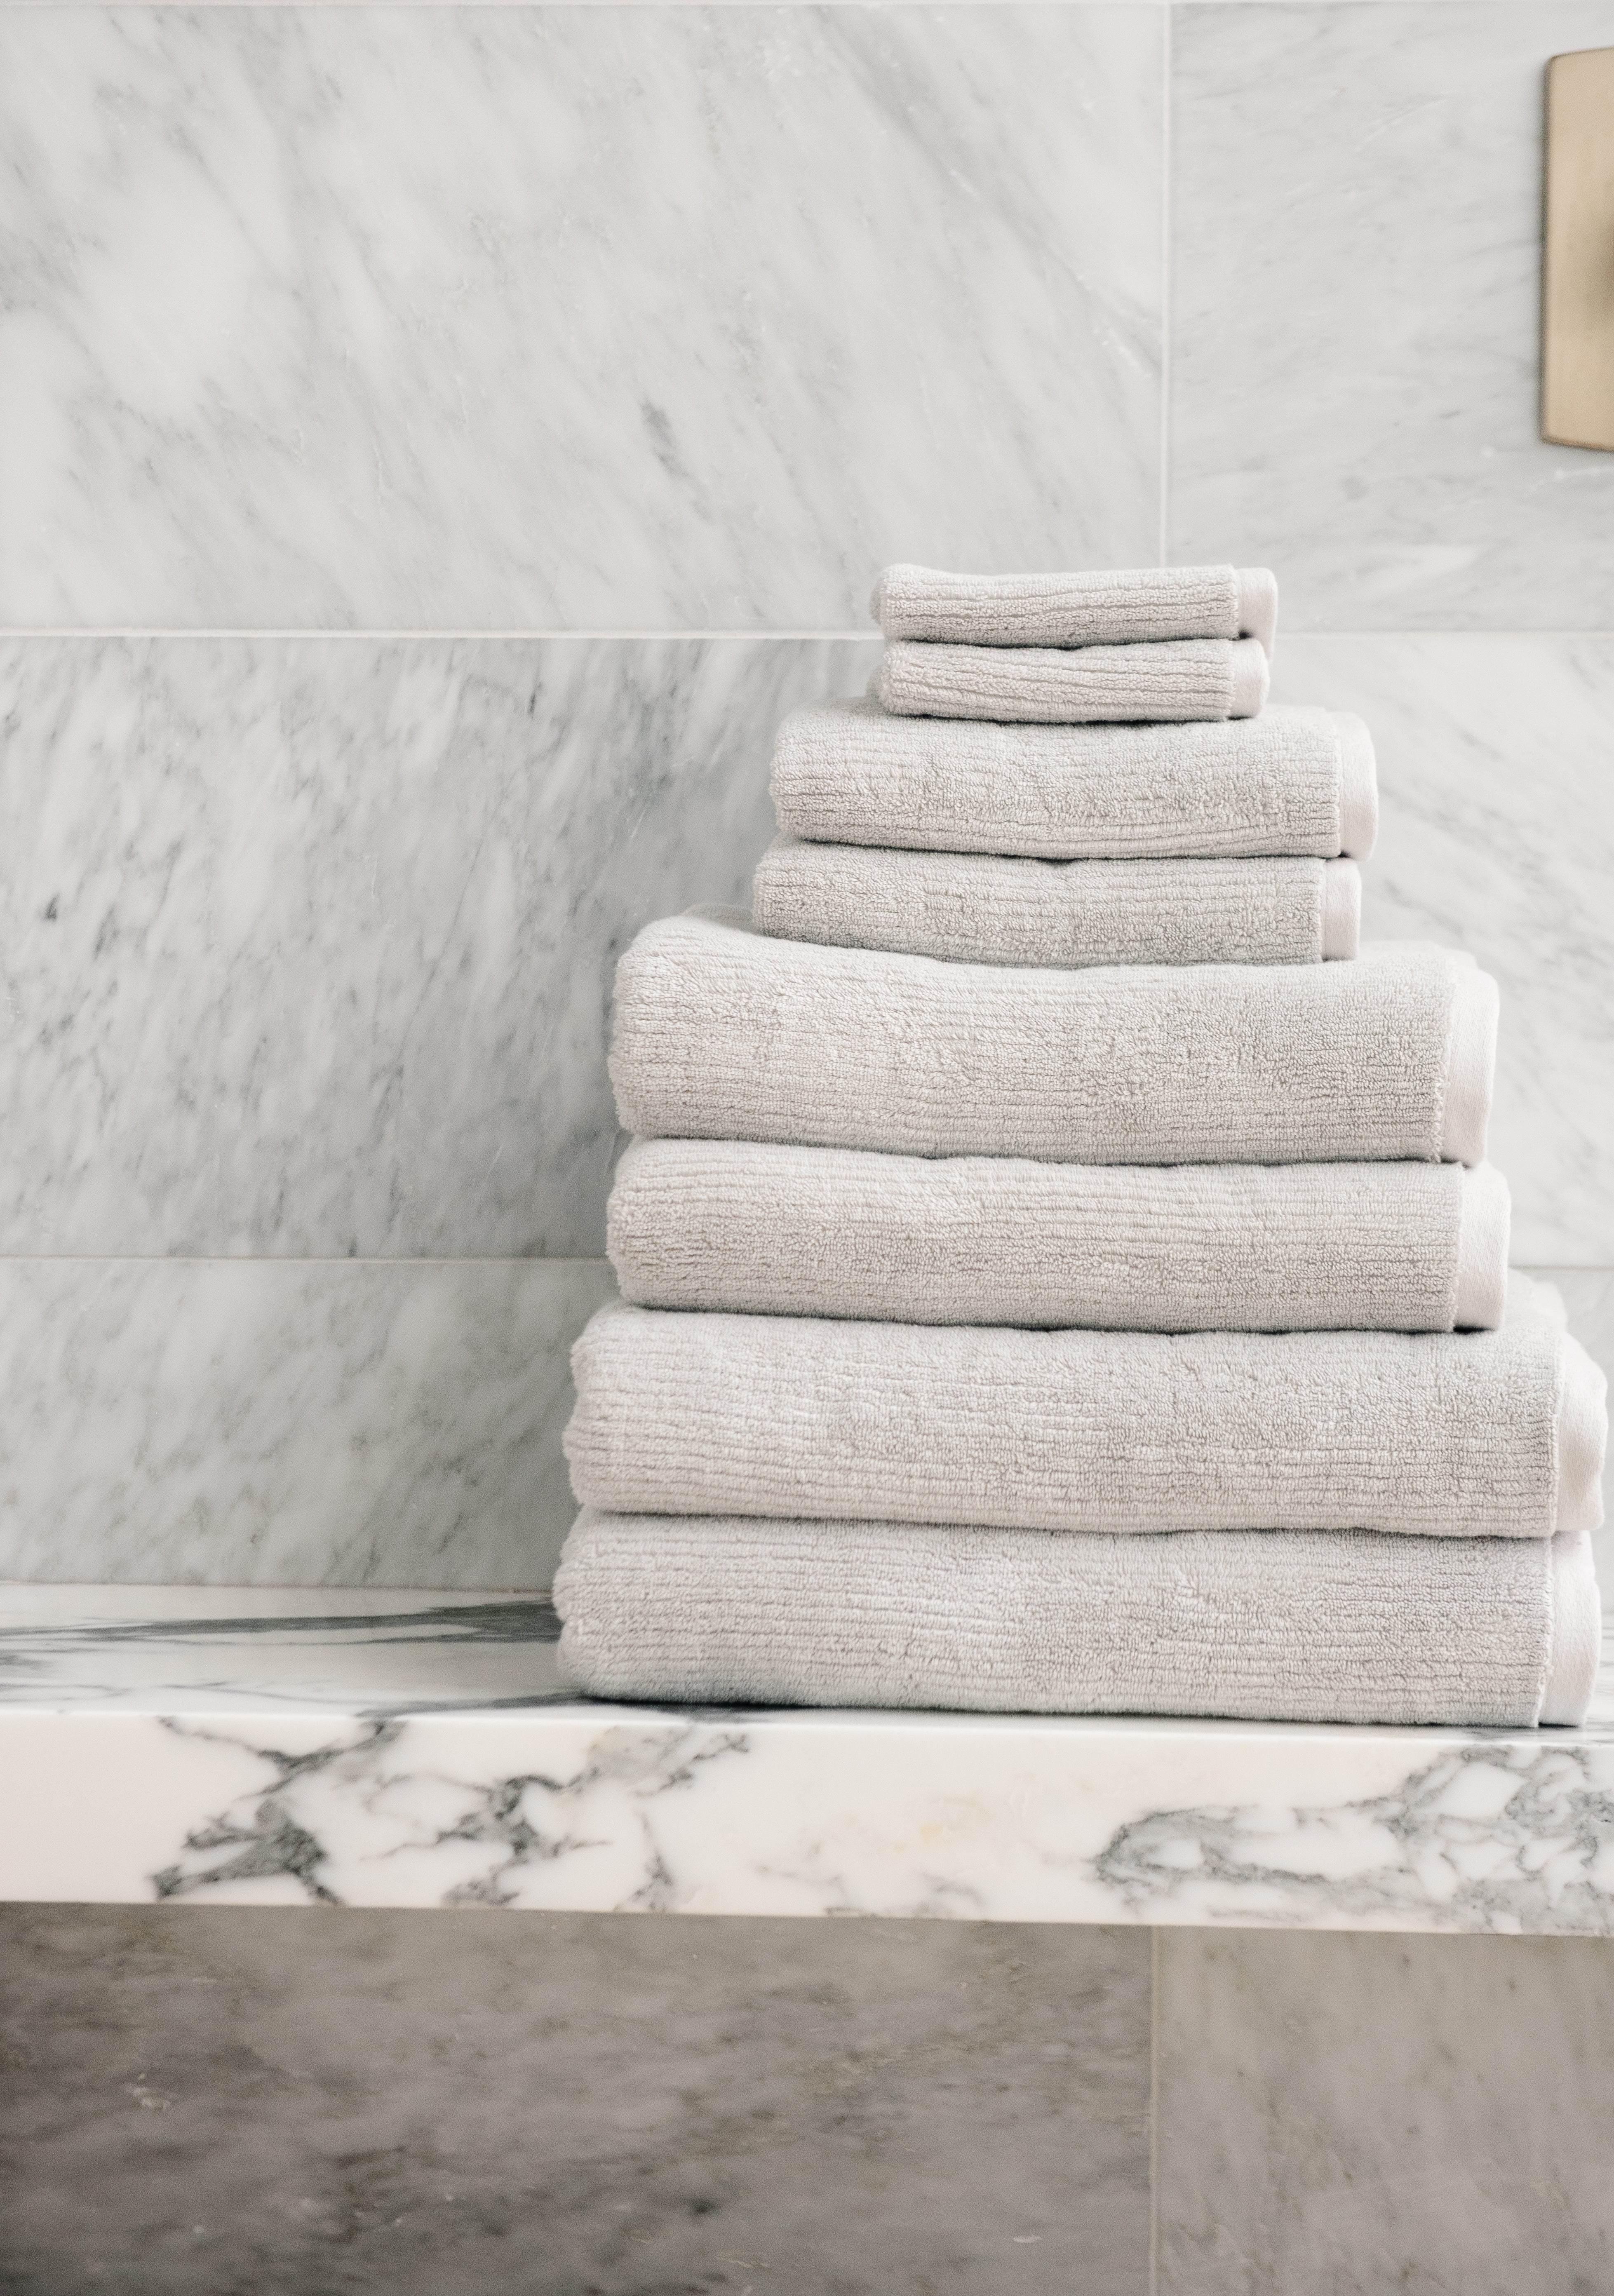 Complete Ribbed Terry Bath Bundle in the color Light Grey. Photo of Complete Ribbed Terry Bath Bundle taken in a marble bathroom. The Complete Ribbed Terry Bath Bundle are resting on a marble counter top. |Color:Light Grey